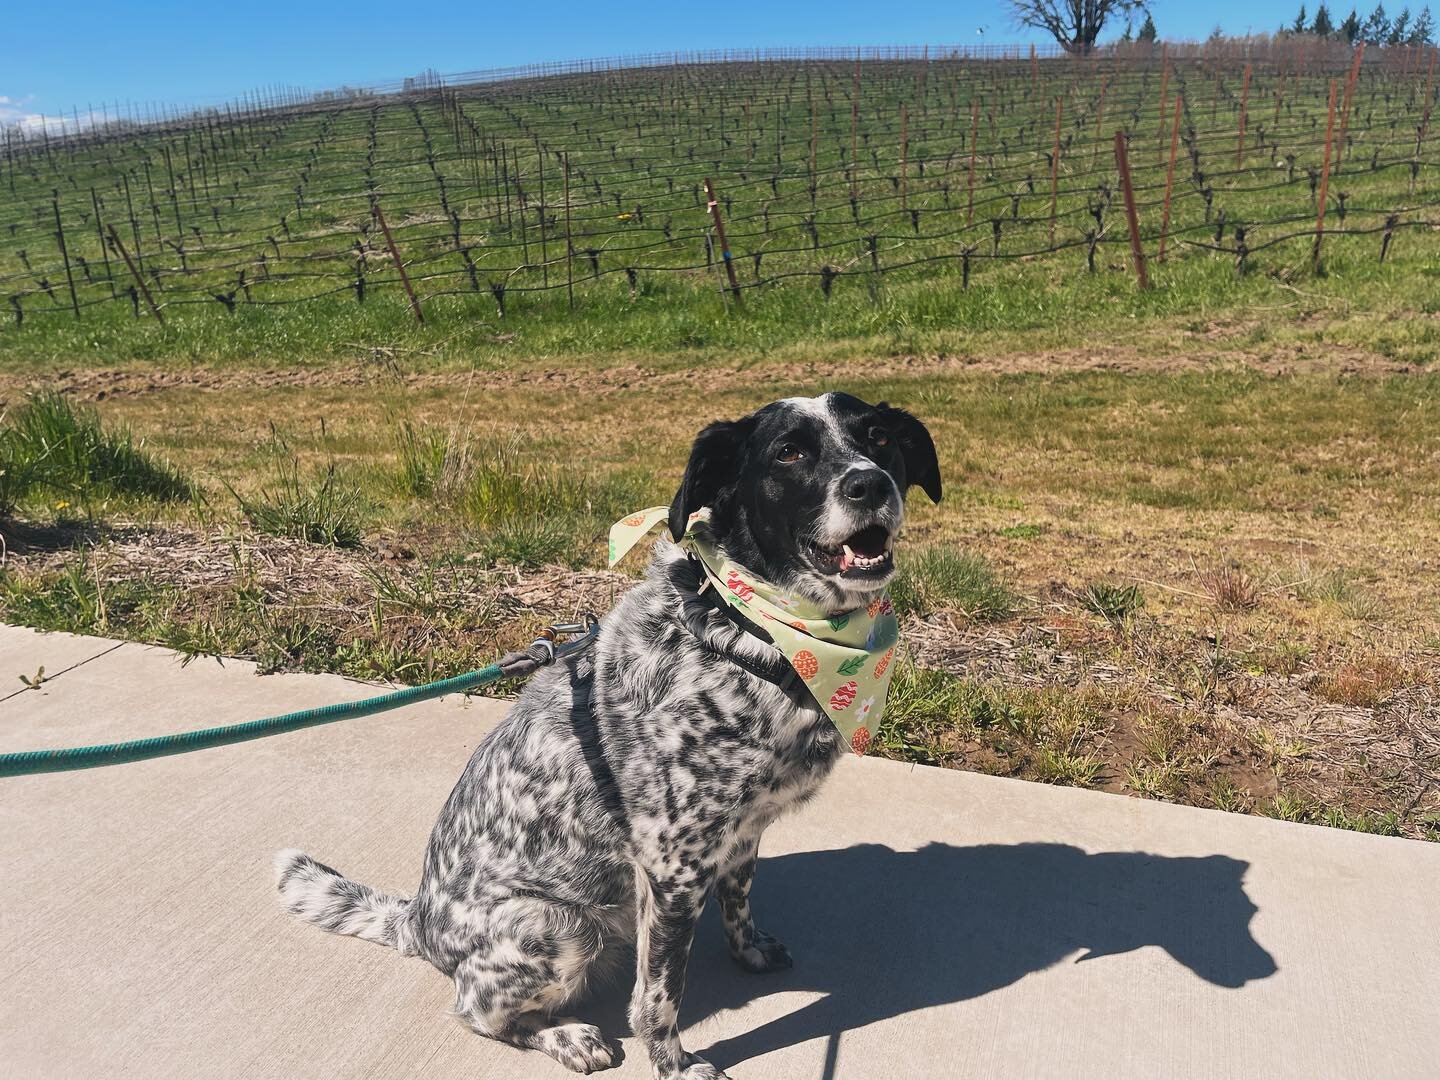 We welcome more than just Black Dogs here at the vineyard! We love visits from our puppy friends of all shapes and sizes!

And what better time than a sunny Spring weekend to get a visit from some good, good dogs like Ellie and Gus! 

Our patio is al